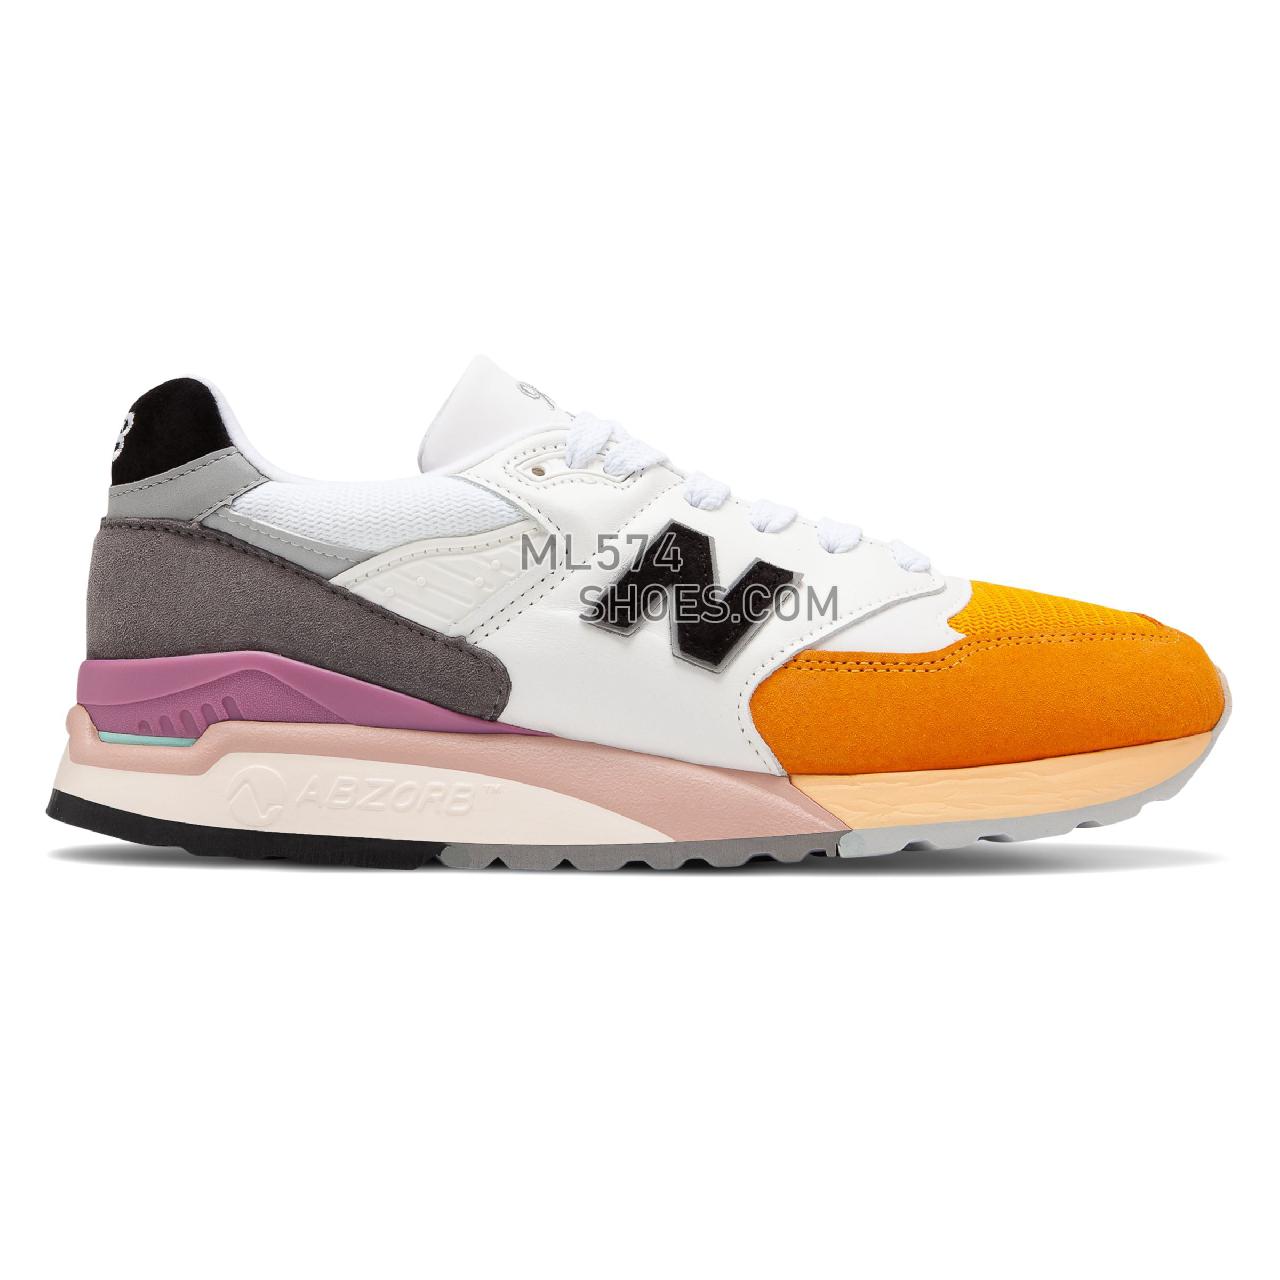 New Balance Made in US 998 - Men's Made in US 998 - Orange with Grey - M998PSD